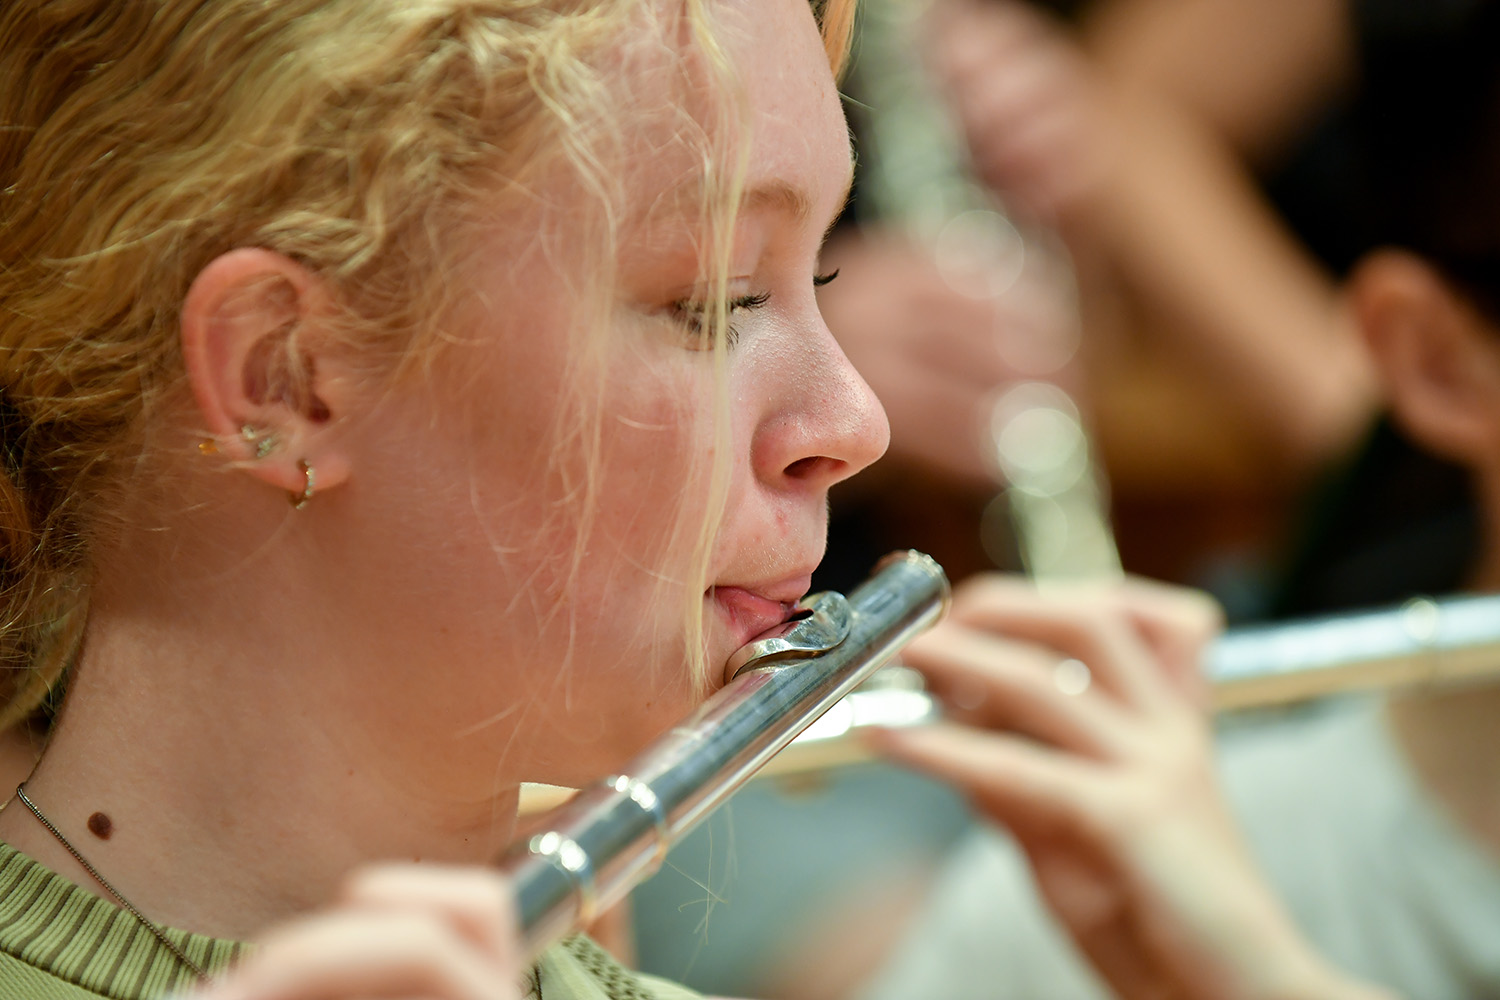 A close up image of a JD student performing on the flute